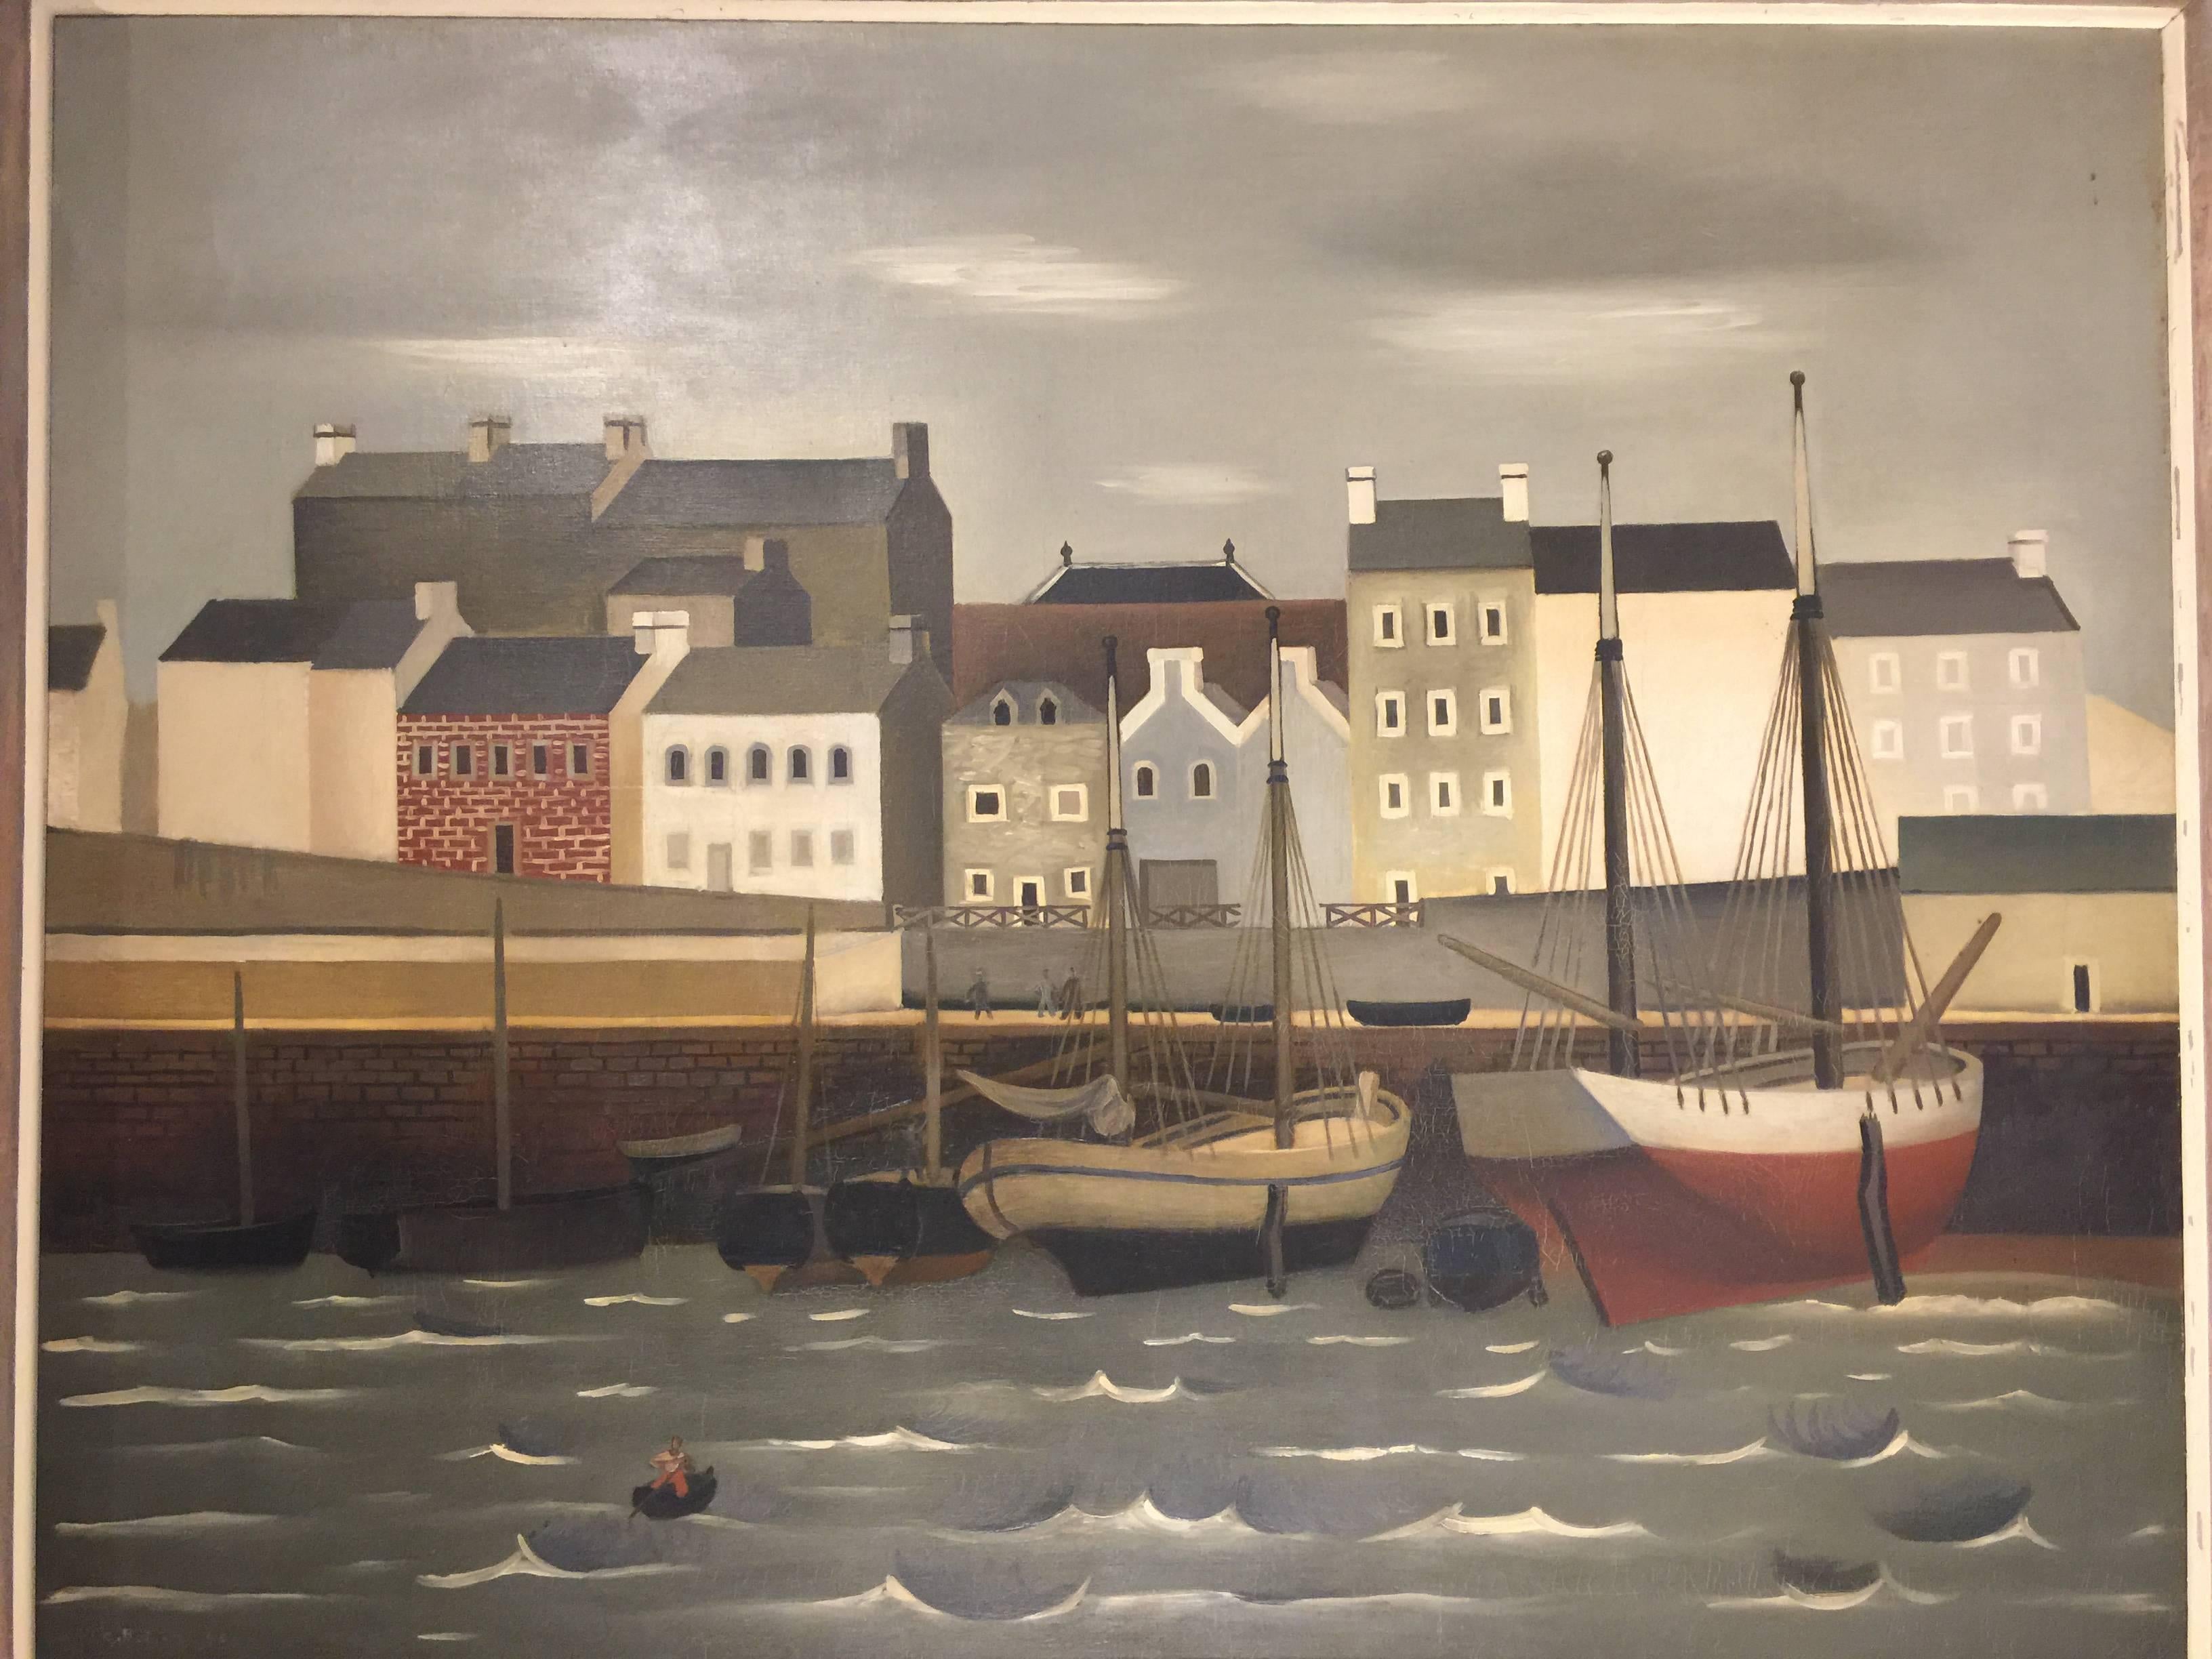 Large George’s Rohner harborscape painting. Oil on canvas, signed lower left in the paint. Masterful composition and atmospheric painting of a French seaport. Painted in 1945.